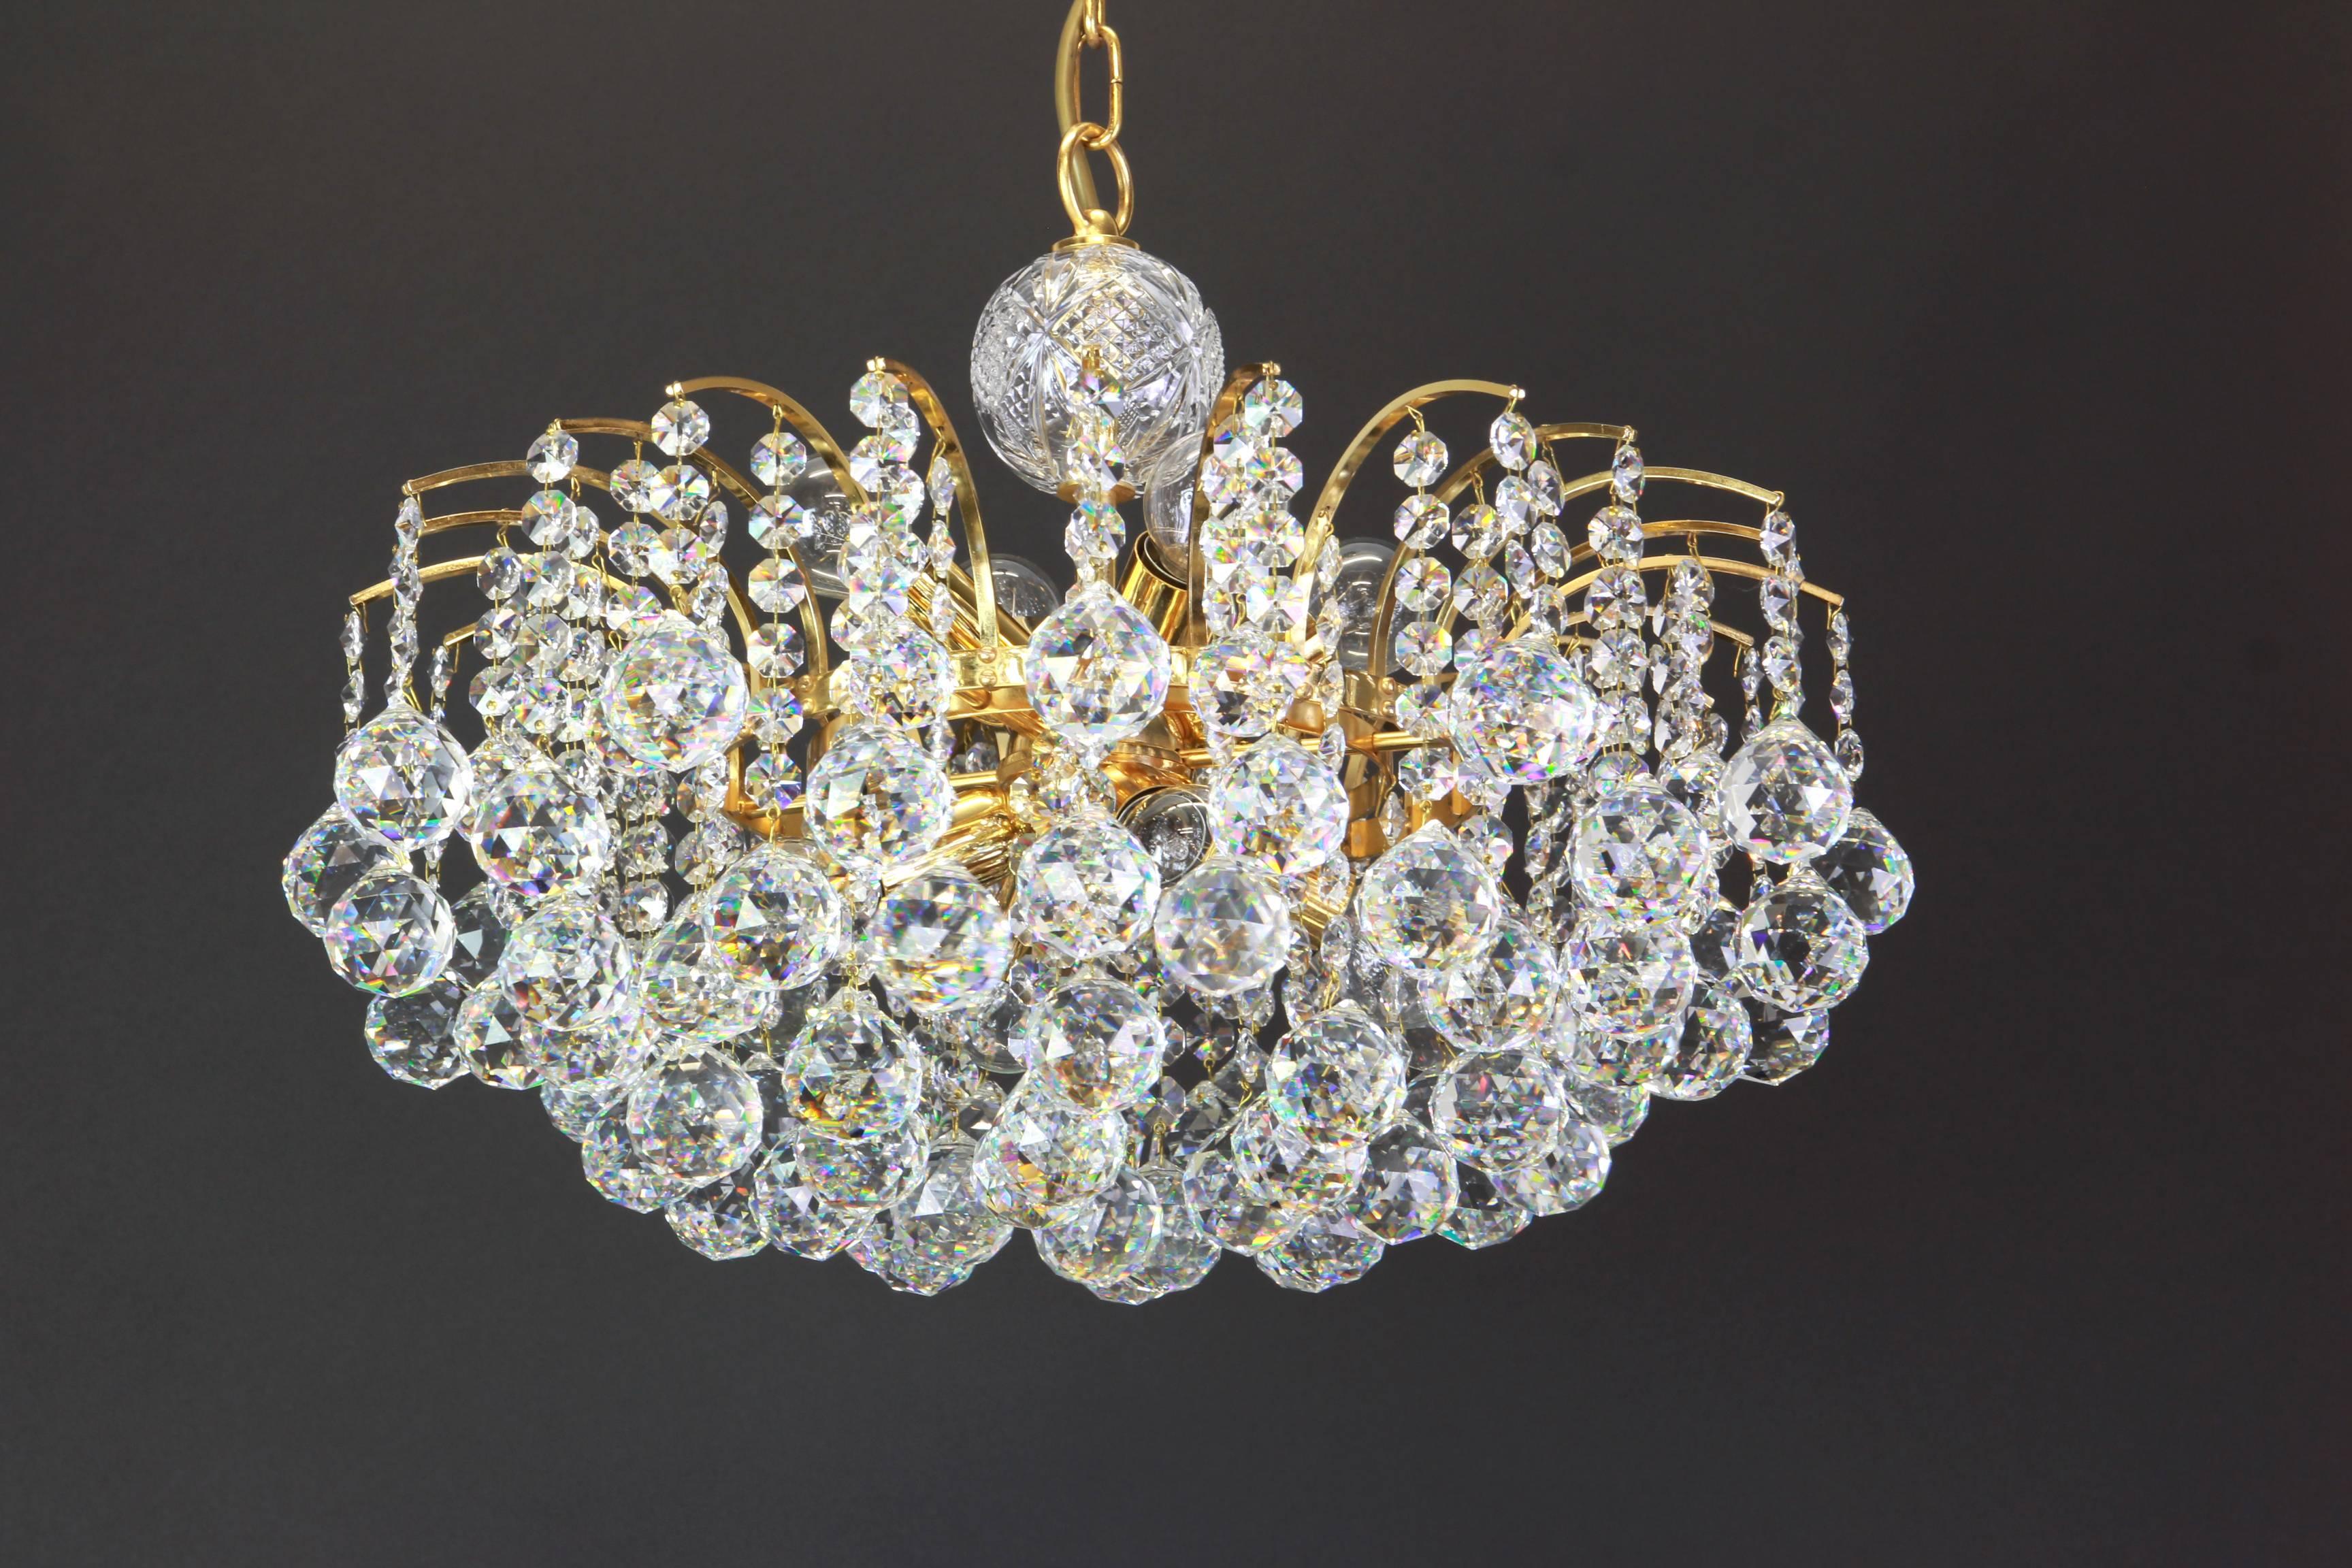 Elegant Chandelier with wonderful crystal balls on a brass base, suspended from tiny hooks.
From: Christoph Palme, Germany, circa 1970s. 

High quality and in very good condition. Cleaned, well-wired and ready to use. 

The fixture requires 8 x E14